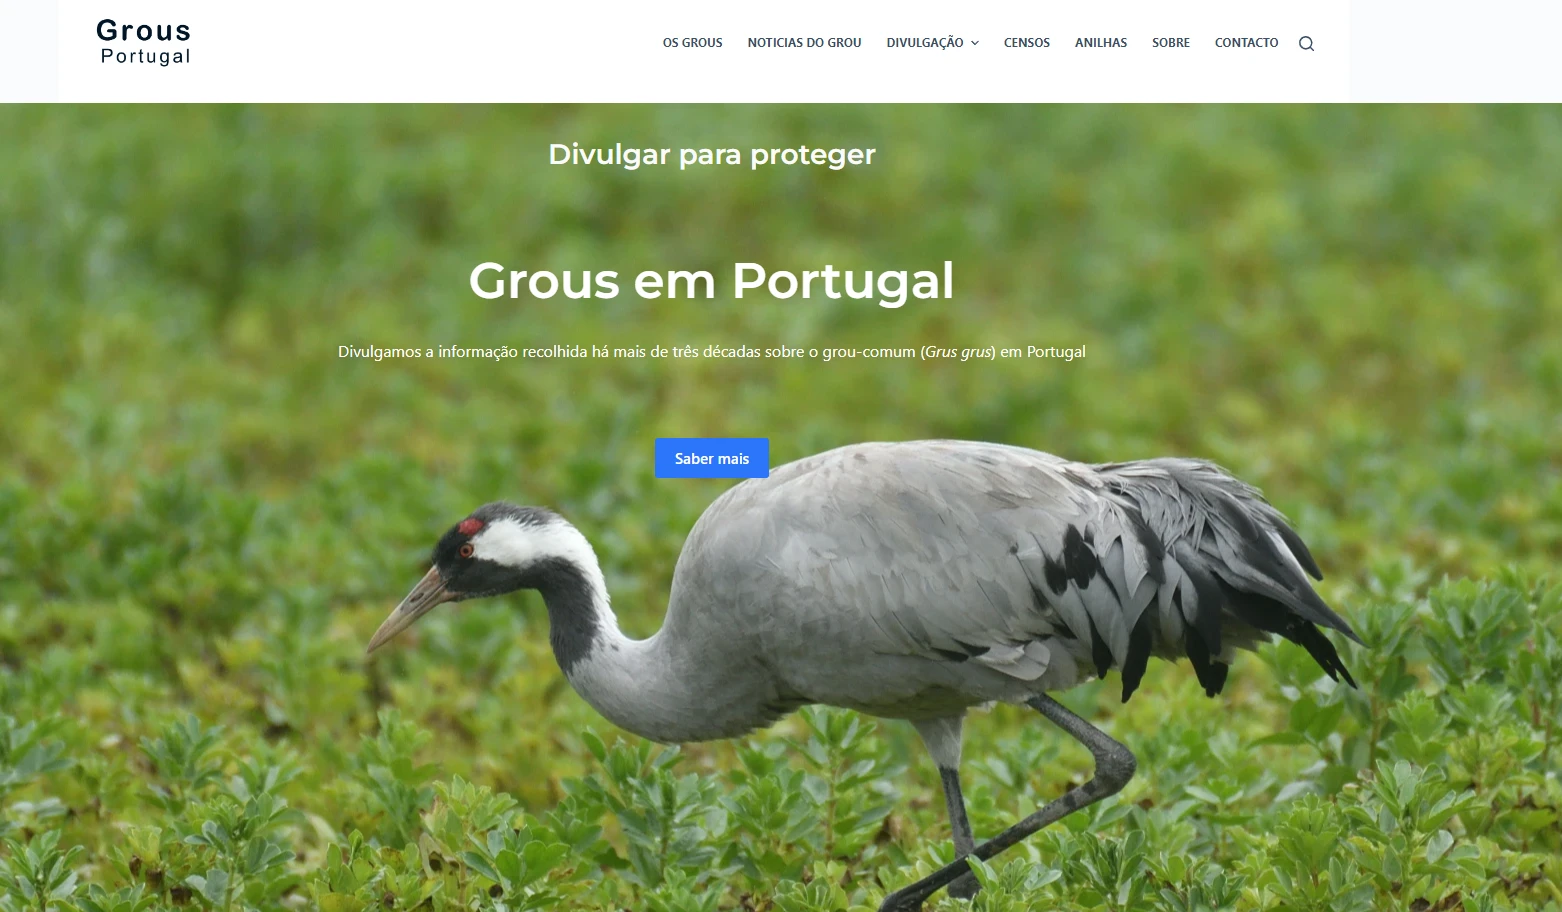 frontpage do website GrousPortugal.org